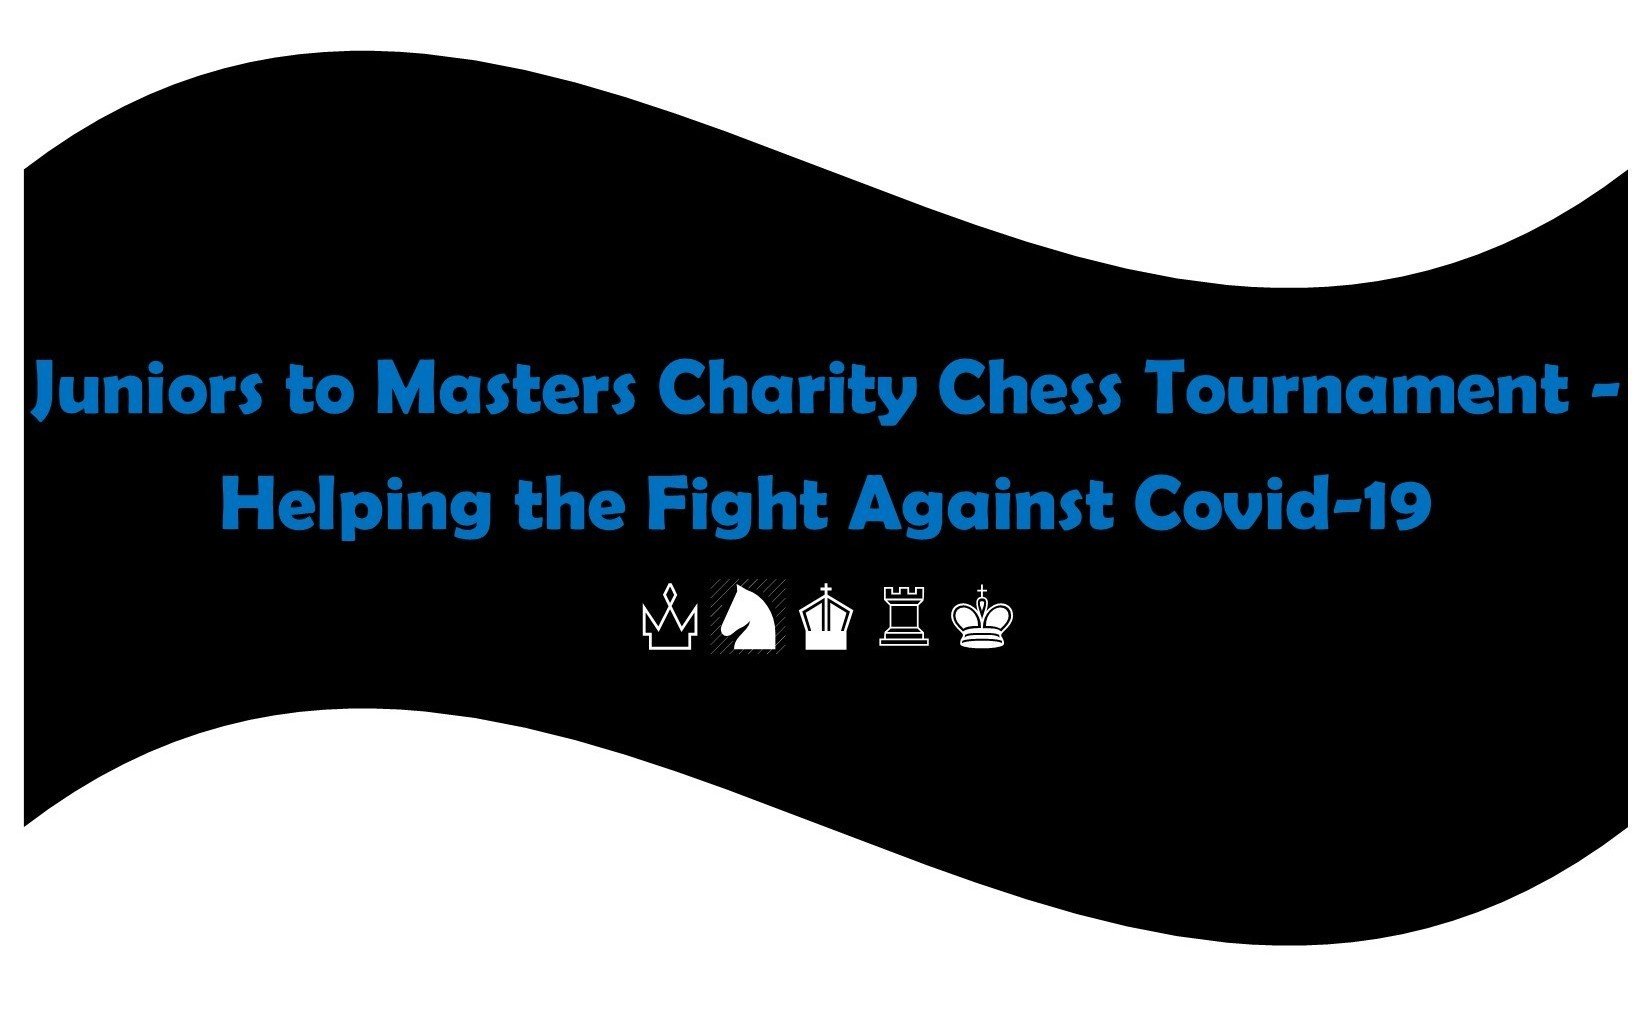 Report: Juniors to Masters Charity Chess Tournament – Helping the Fight Against Covid-19